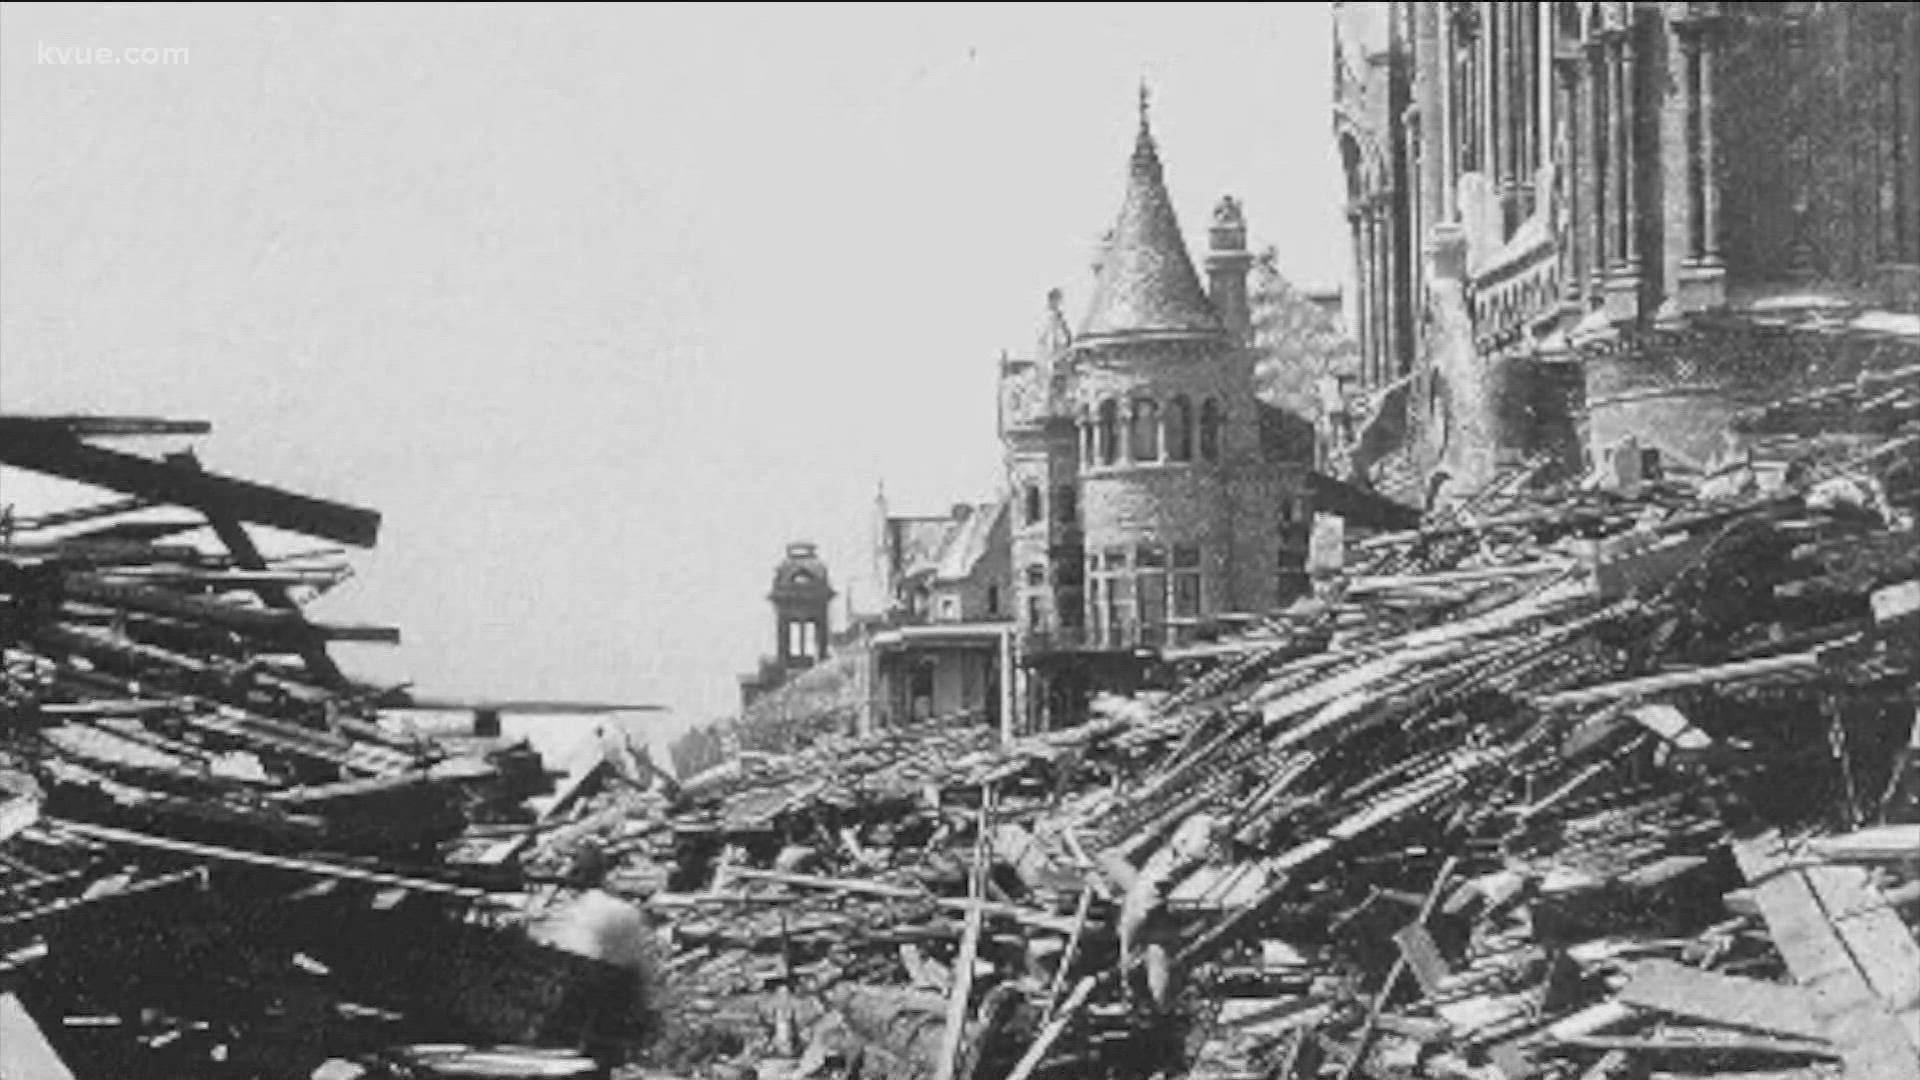 The worst disaster in the United States, in terms of lives lost, happened this week in 1900 when a hurricane struck Galveston.